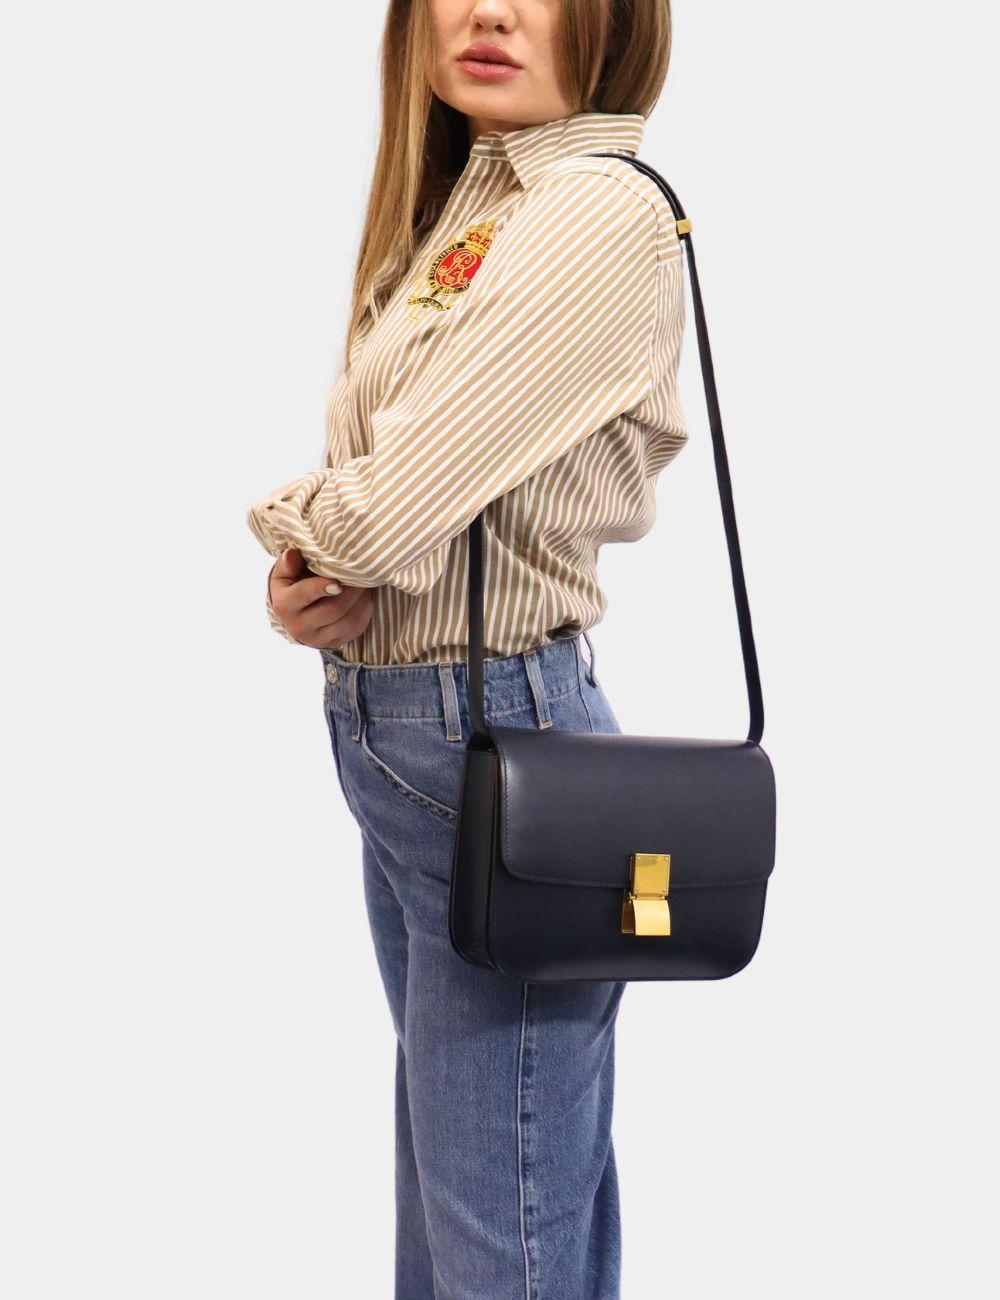 Celine Navy Leather Medium Classic Box Shoulder Bag, Features a leather adjustable strap, gold plaque, two compartments and one interior pocket.

Material: Leather
Hardware: Gold
Height: 18cm
Width: 23cm
Depth: 8cm
Strap Drop: 44cm
Overall